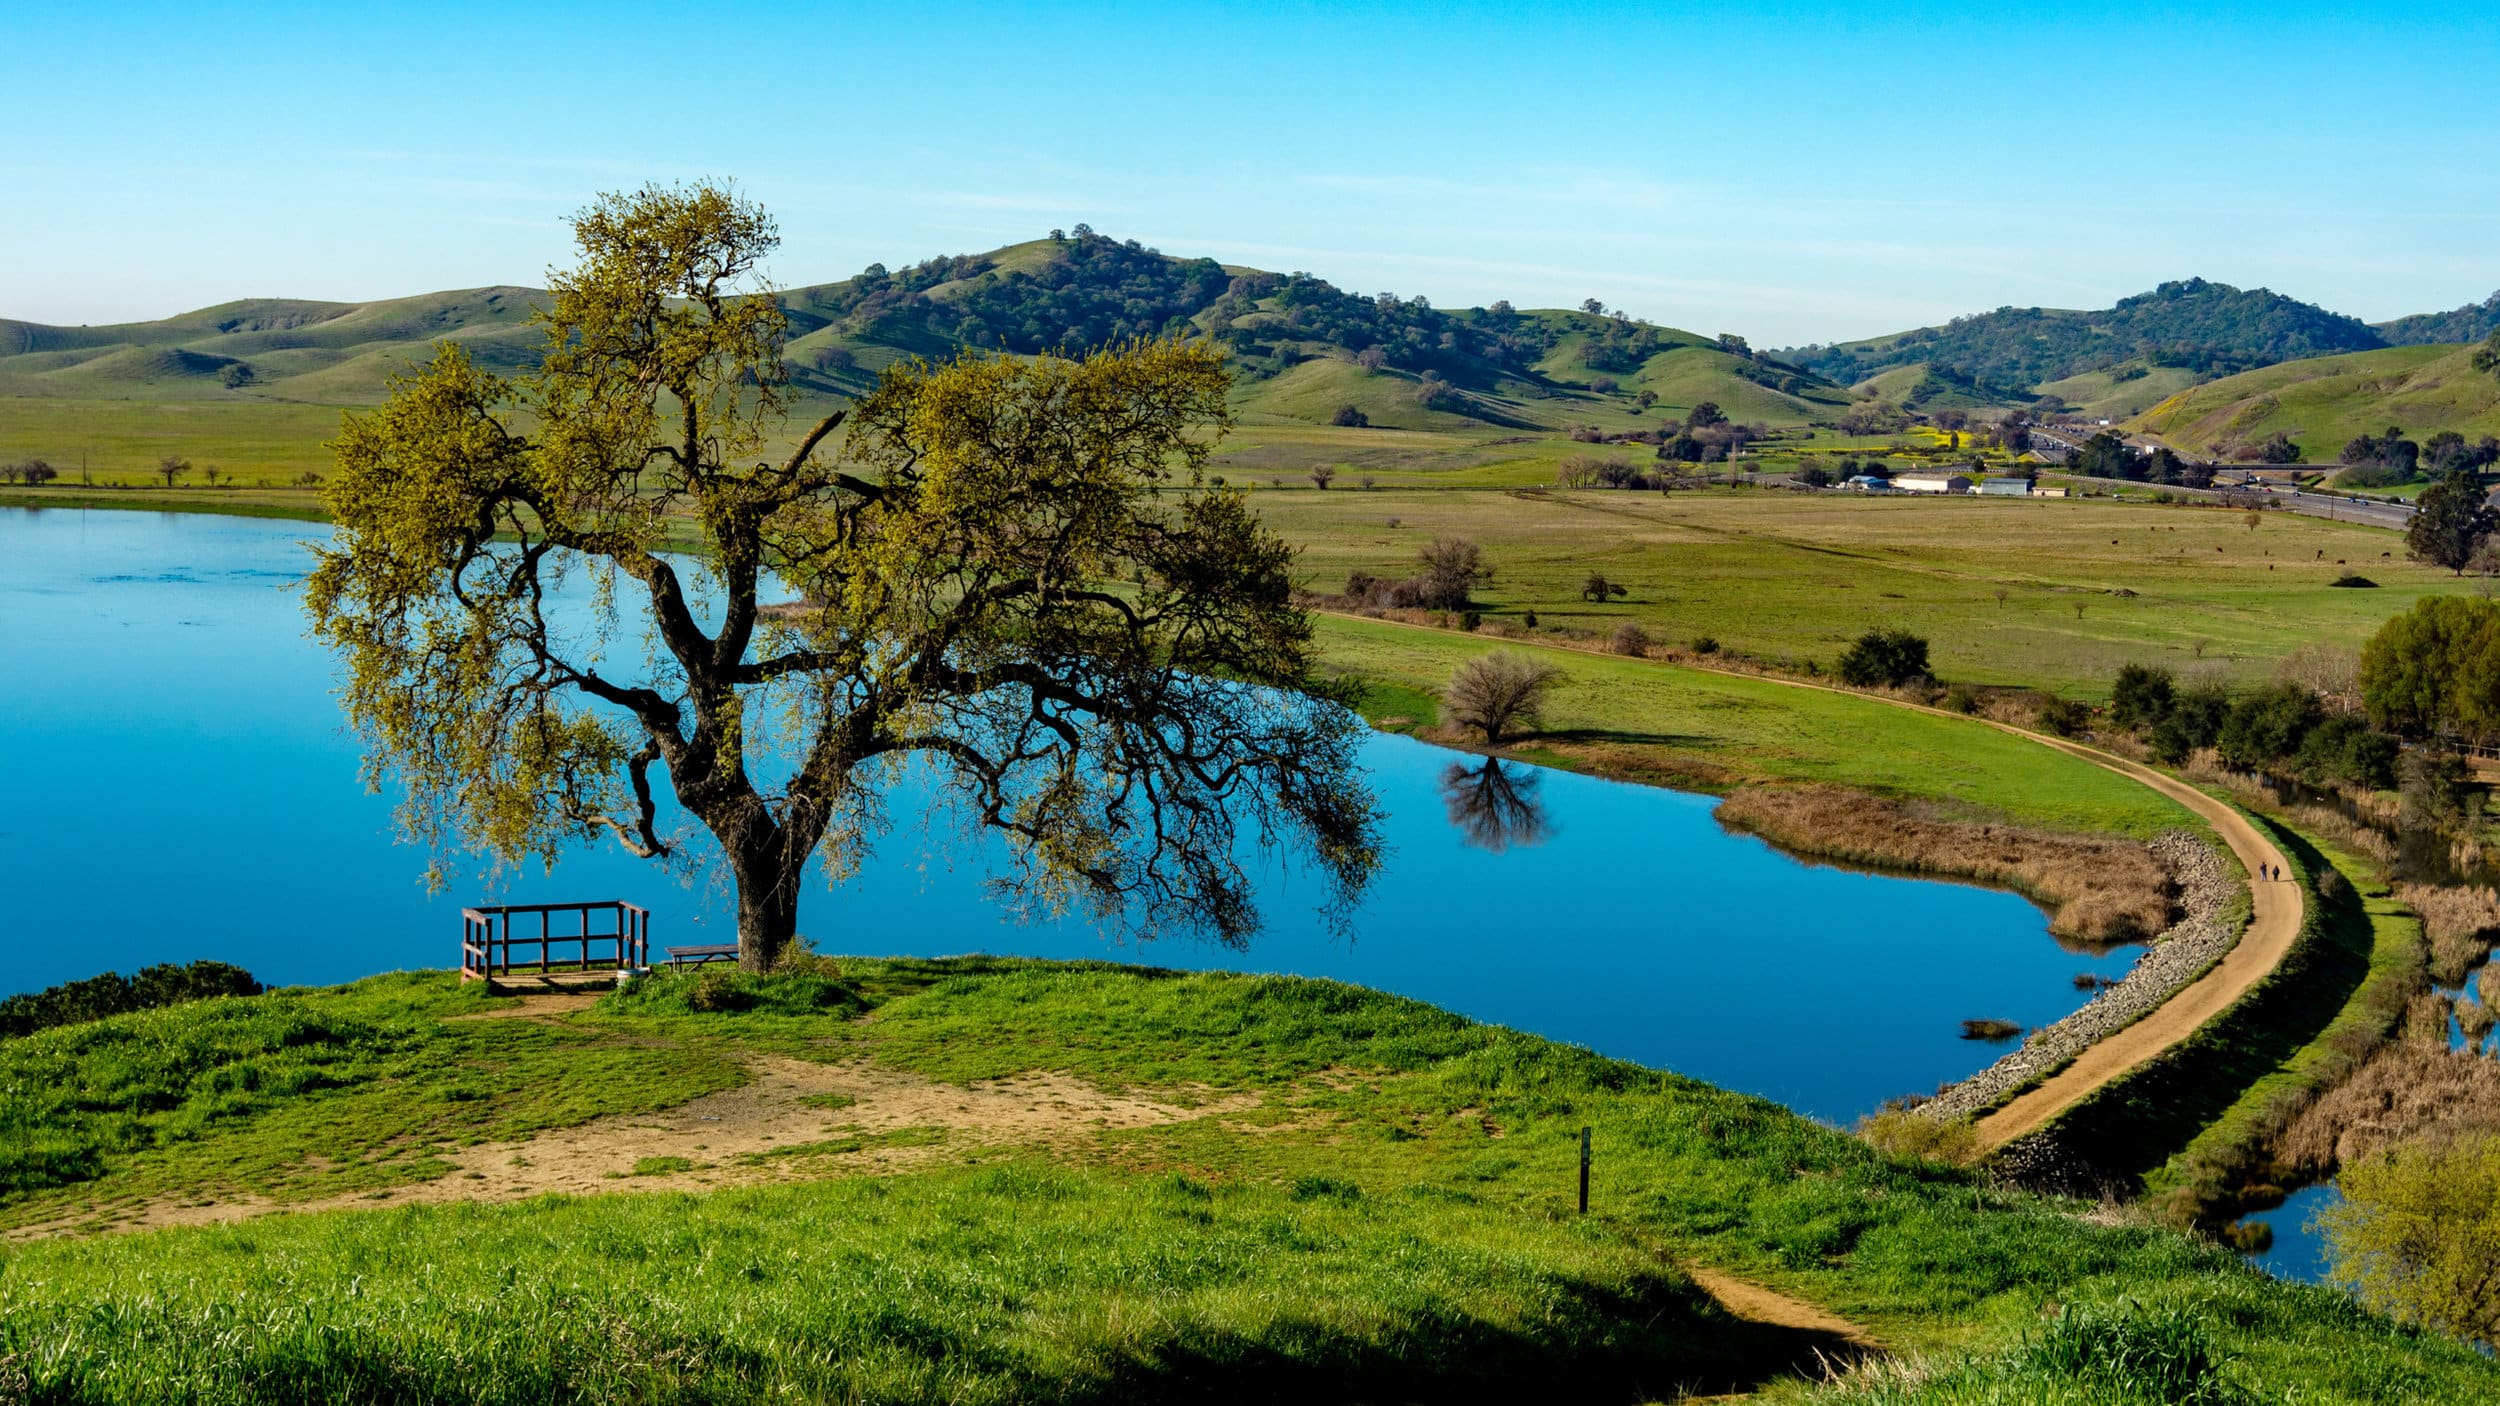 Panoramic view of Lagoon Valley Park in Vacaville, California, USA, featuring oak tree and a lake and pedestrian walkway around it, from above